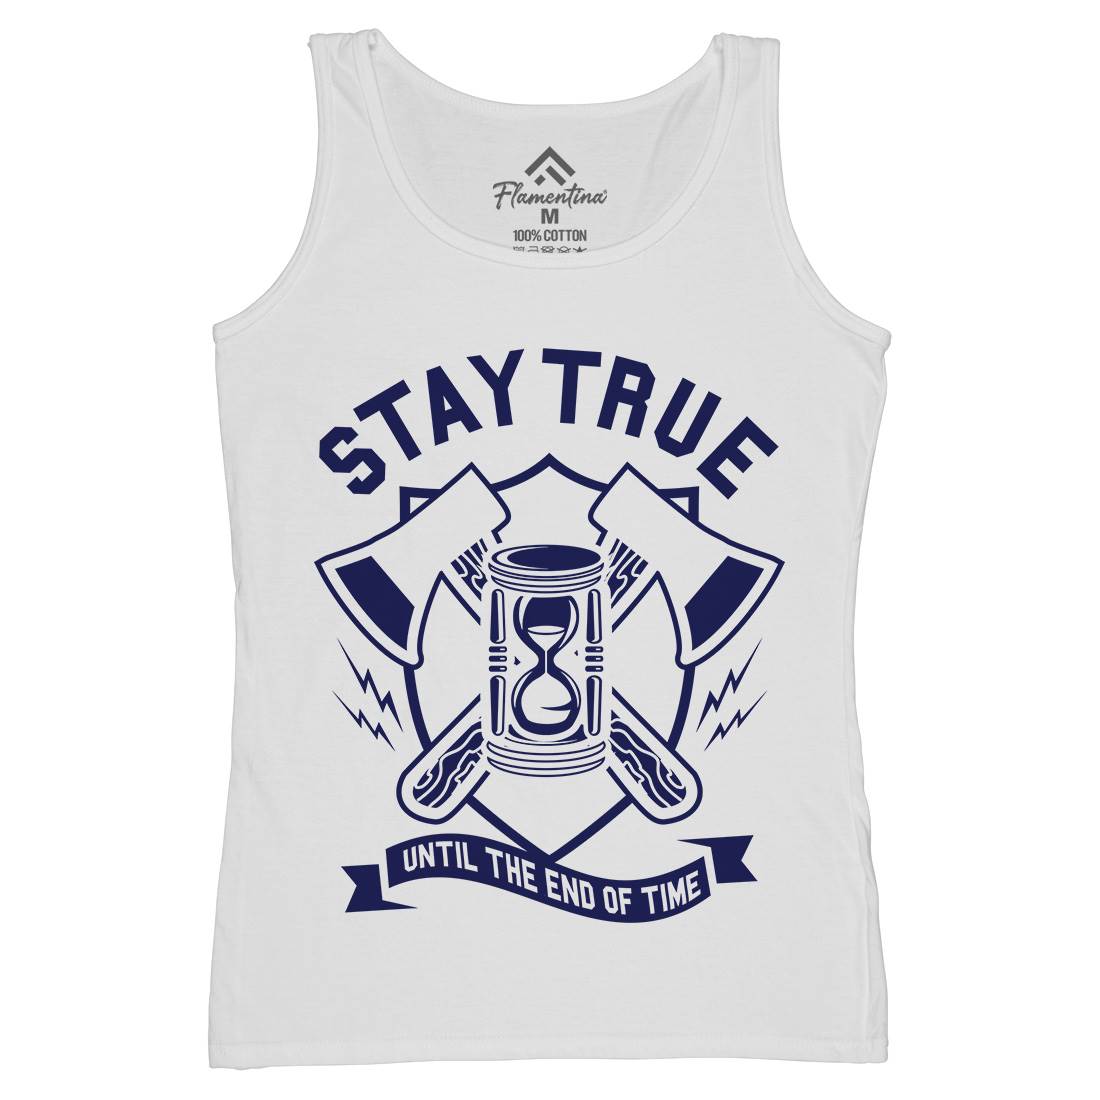 Stay True Womens Organic Tank Top Vest Quotes A285